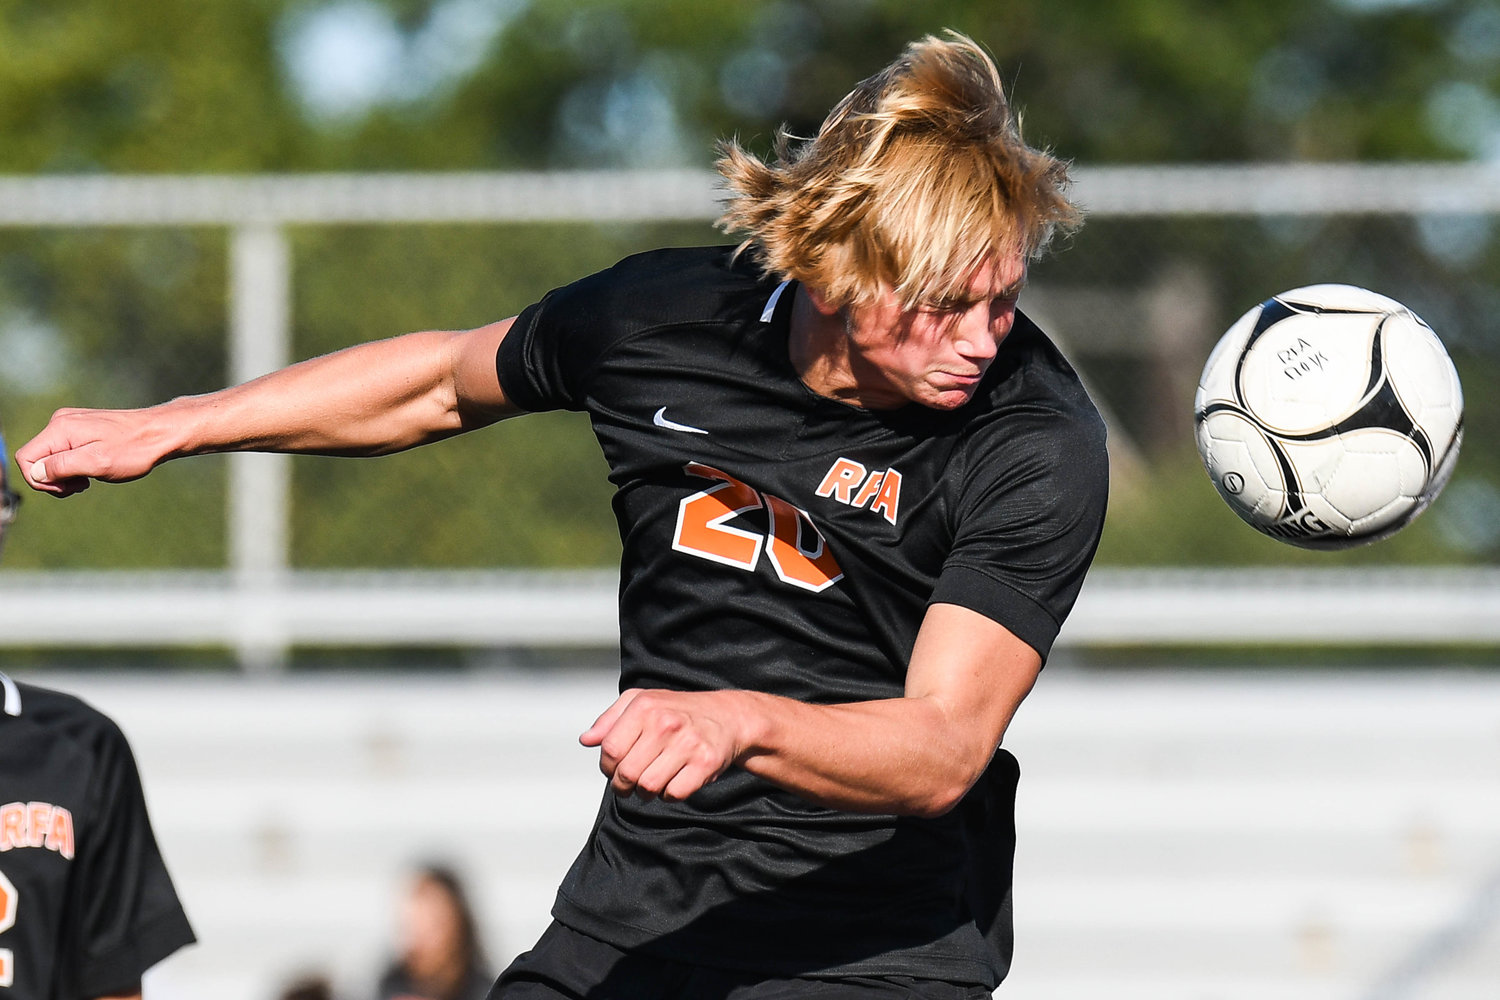 Rome Free Academy forward Paul Zimmerman heads the ball toward the net during the game against Whitesboro on Thursday at RFA Stadium. Zimmerman earned an assist in the team’s 4-1 win.